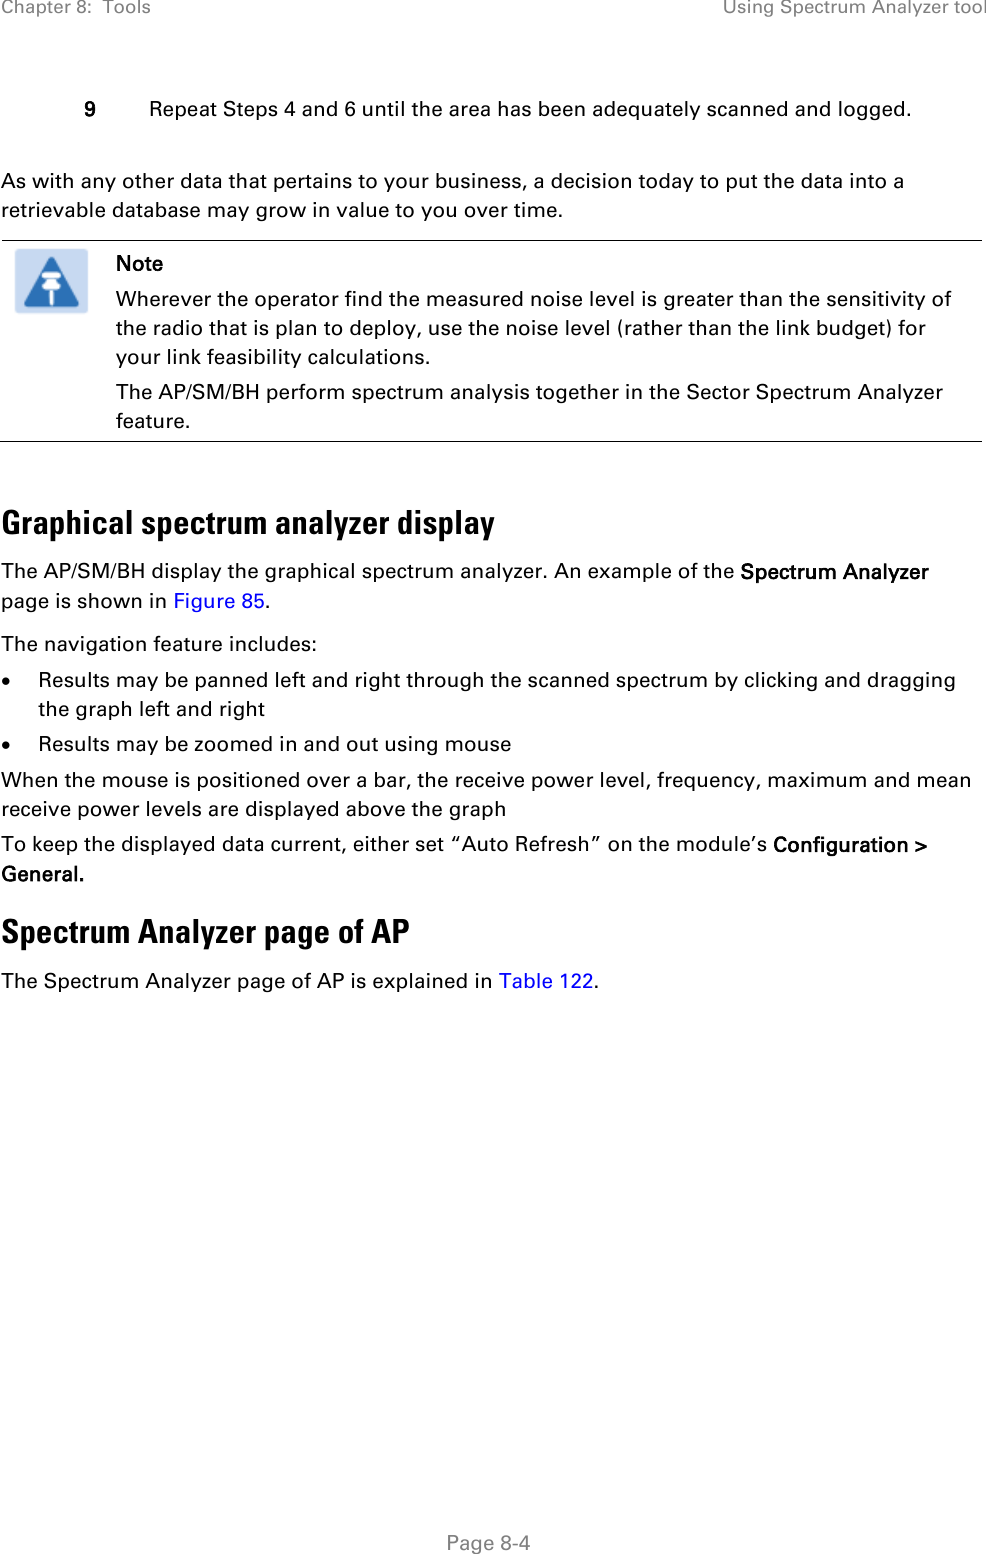 Chapter 8:  Tools Using Spectrum Analyzer tool   Page 8-4 9 Repeat Steps 4 and 6 until the area has been adequately scanned and logged.  As with any other data that pertains to your business, a decision today to put the data into a retrievable database may grow in value to you over time.   Note Wherever the operator find the measured noise level is greater than the sensitivity of the radio that is plan to deploy, use the noise level (rather than the link budget) for your link feasibility calculations. The AP/SM/BH perform spectrum analysis together in the Sector Spectrum Analyzer feature.  Graphical spectrum analyzer display The AP/SM/BH display the graphical spectrum analyzer. An example of the Spectrum Analyzer page is shown in Figure 85. The navigation feature includes: • Results may be panned left and right through the scanned spectrum by clicking and dragging the graph left and right • Results may be zoomed in and out using mouse When the mouse is positioned over a bar, the receive power level, frequency, maximum and mean receive power levels are displayed above the graph To keep the displayed data current, either set “Auto Refresh” on the module’s Configuration &gt; General. Spectrum Analyzer page of AP The Spectrum Analyzer page of AP is explained in Table 122. 